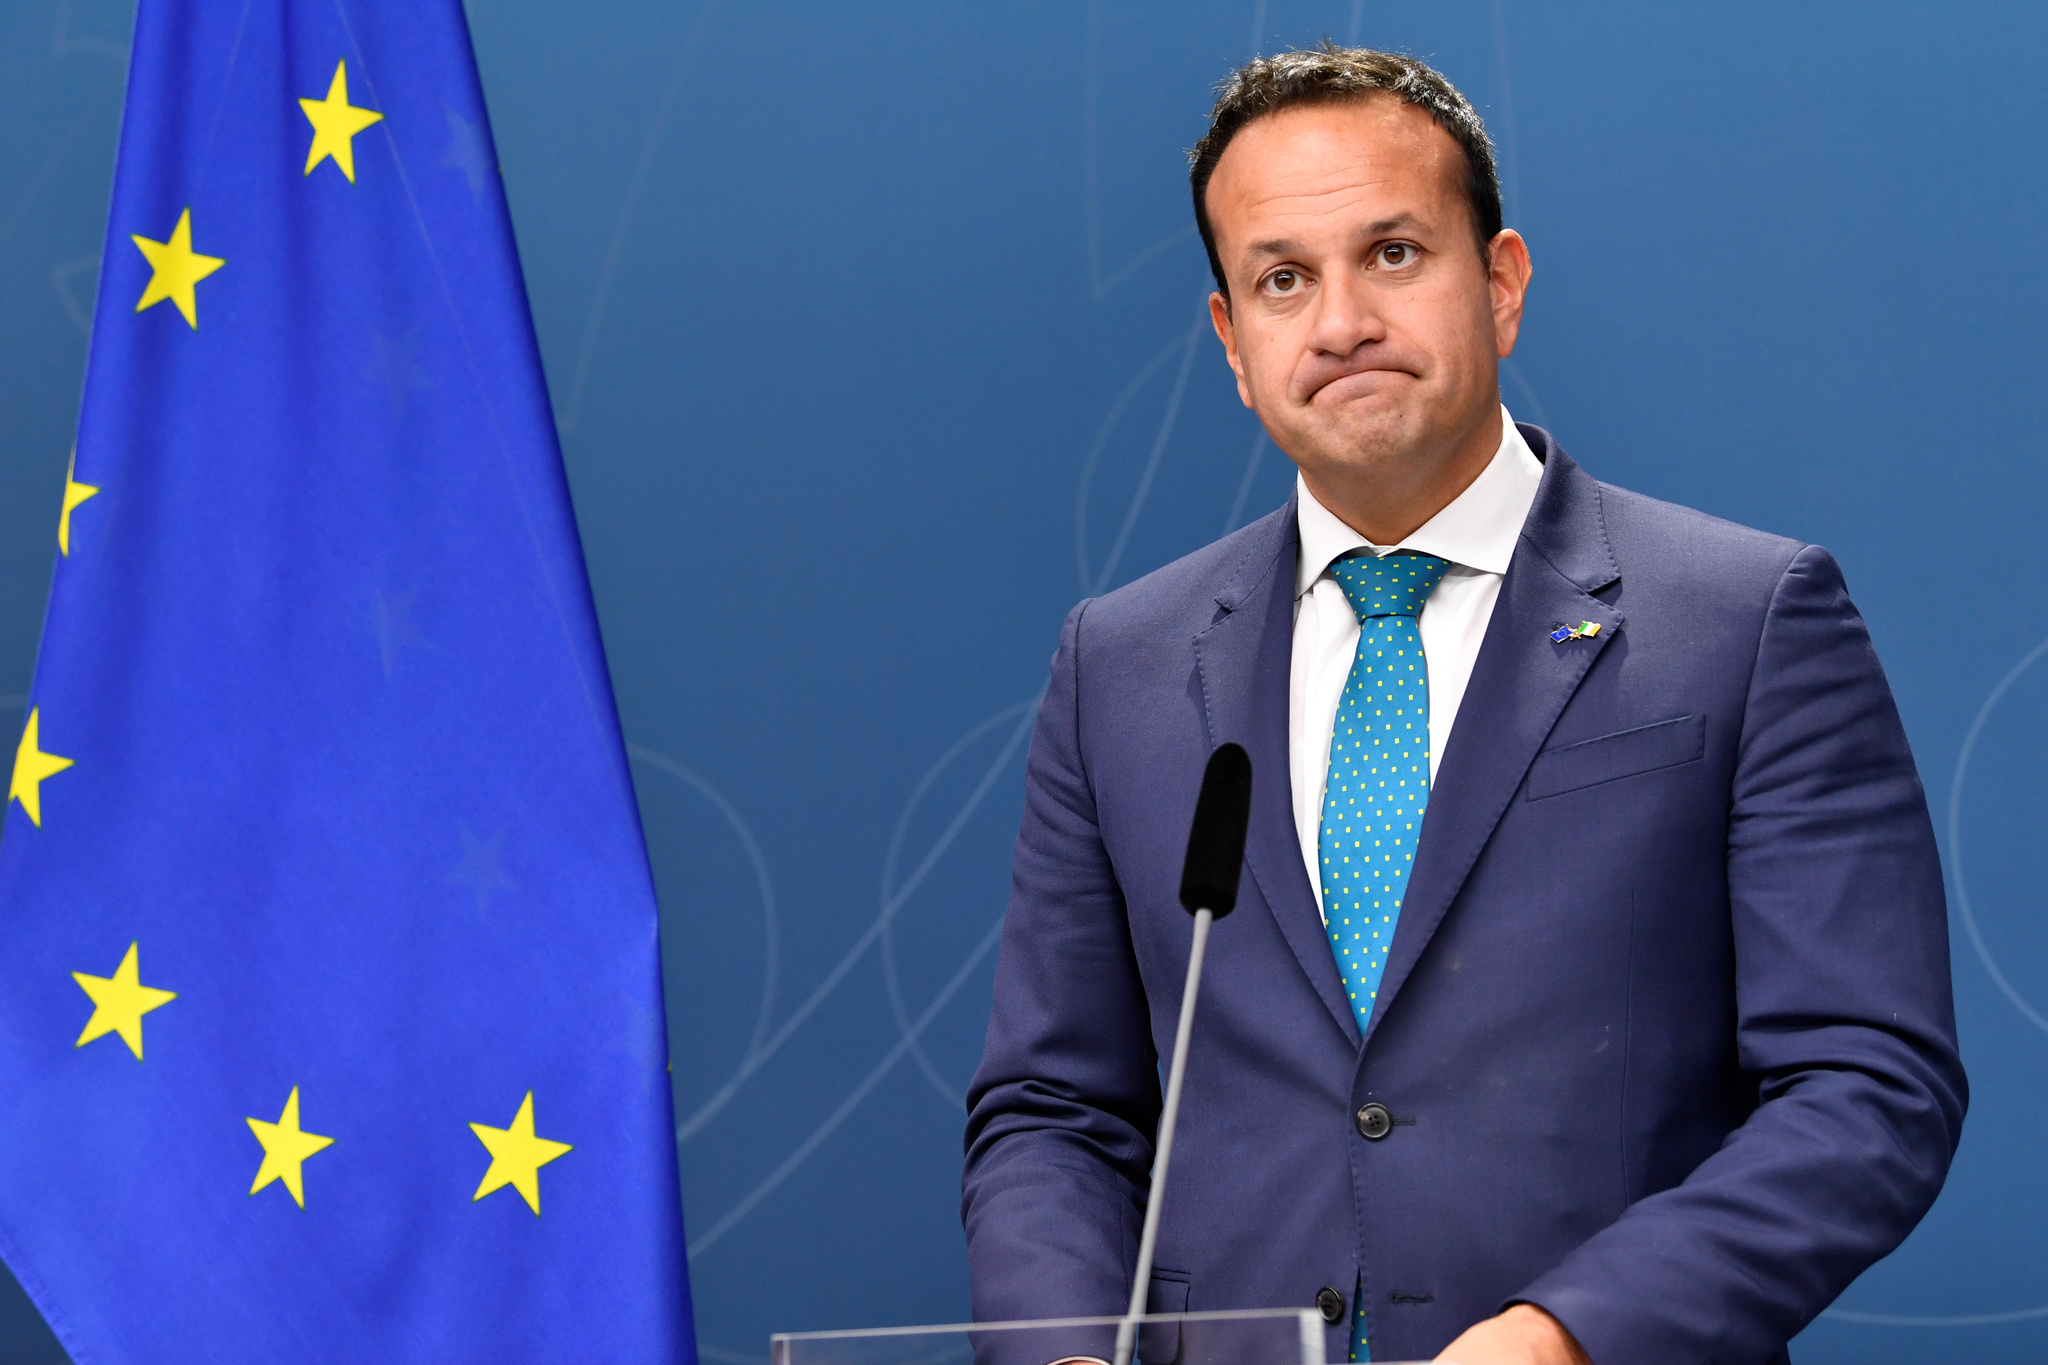 Irish PM Varadkar during a news conference with Swedish PM Lofven in...